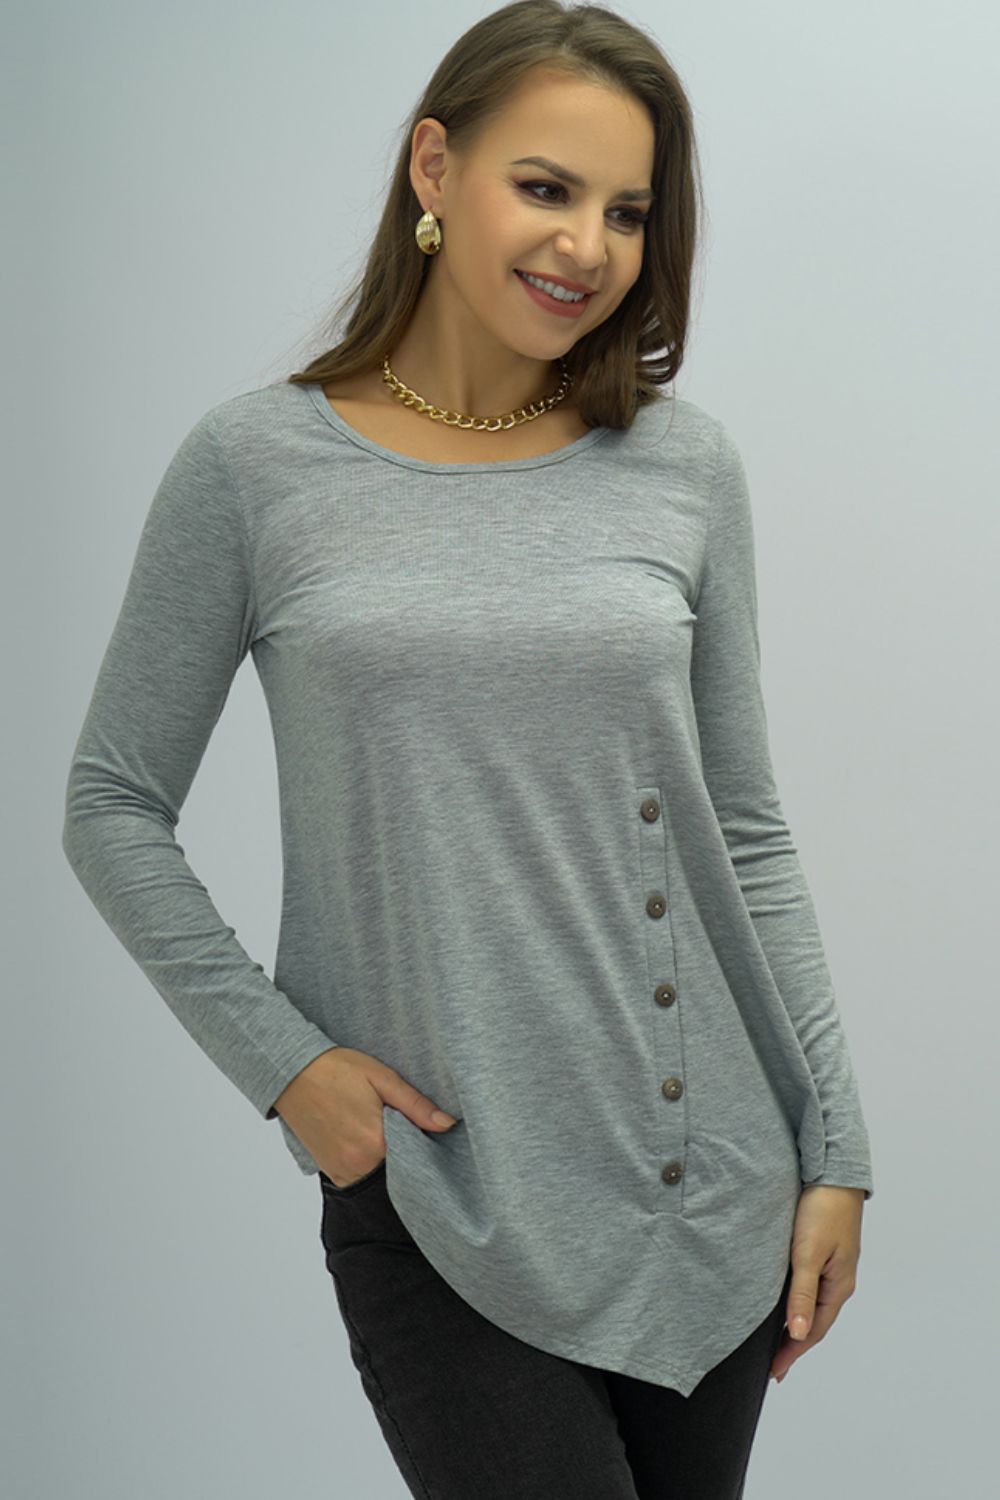 Women’s Buttoned Long Sleeve Round Neck Tee